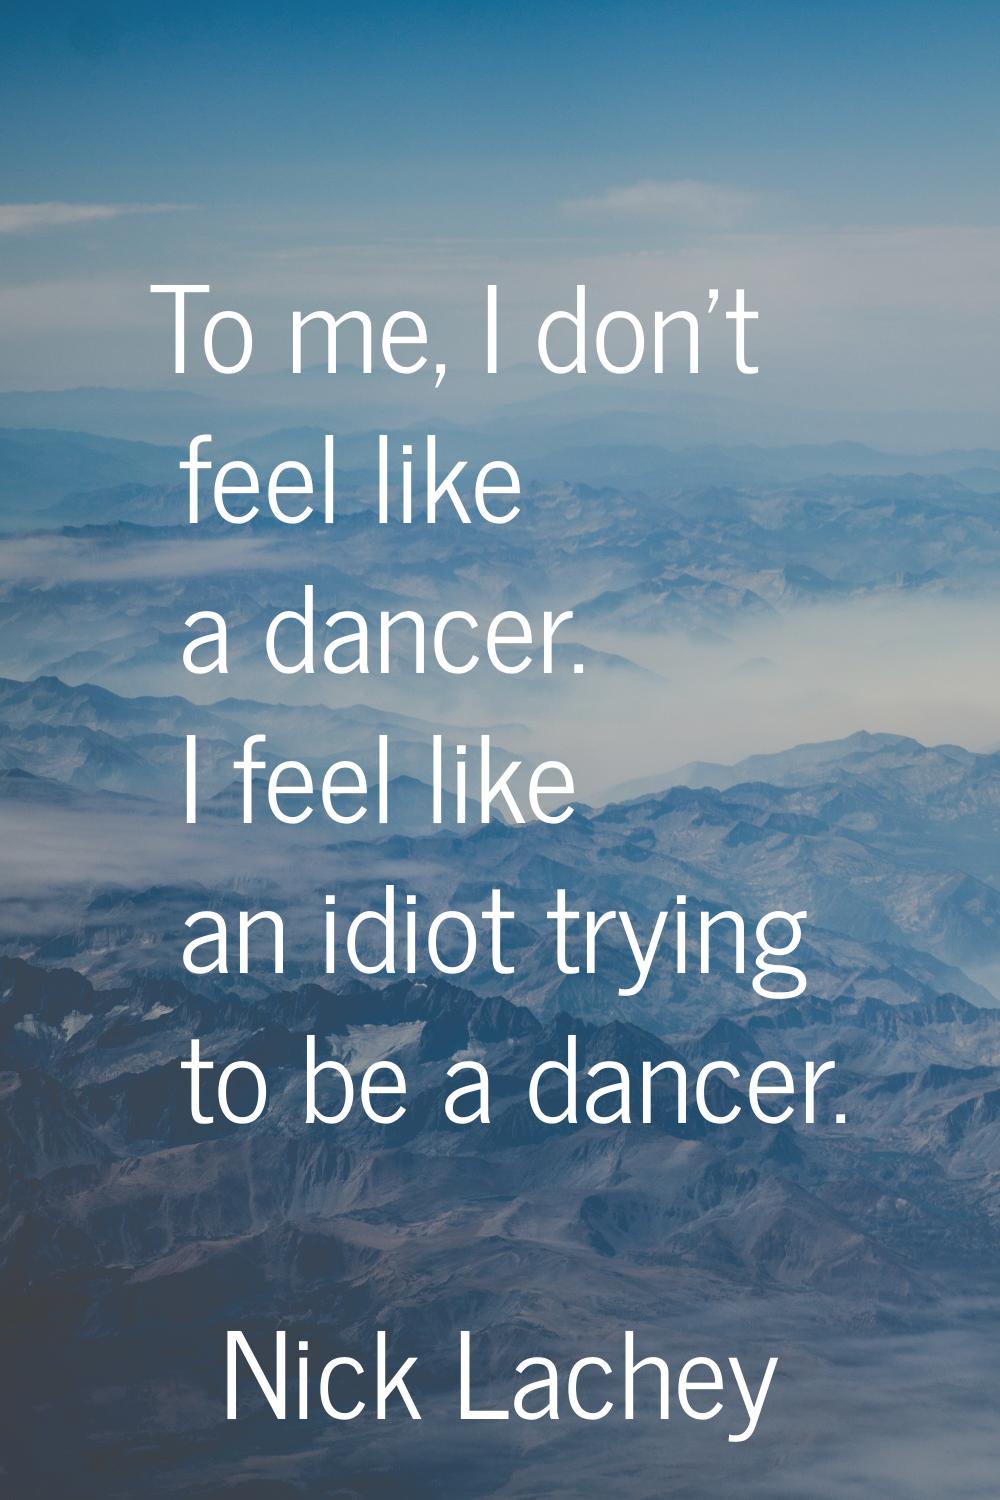 To me, I don't feel like a dancer. I feel like an idiot trying to be a dancer.